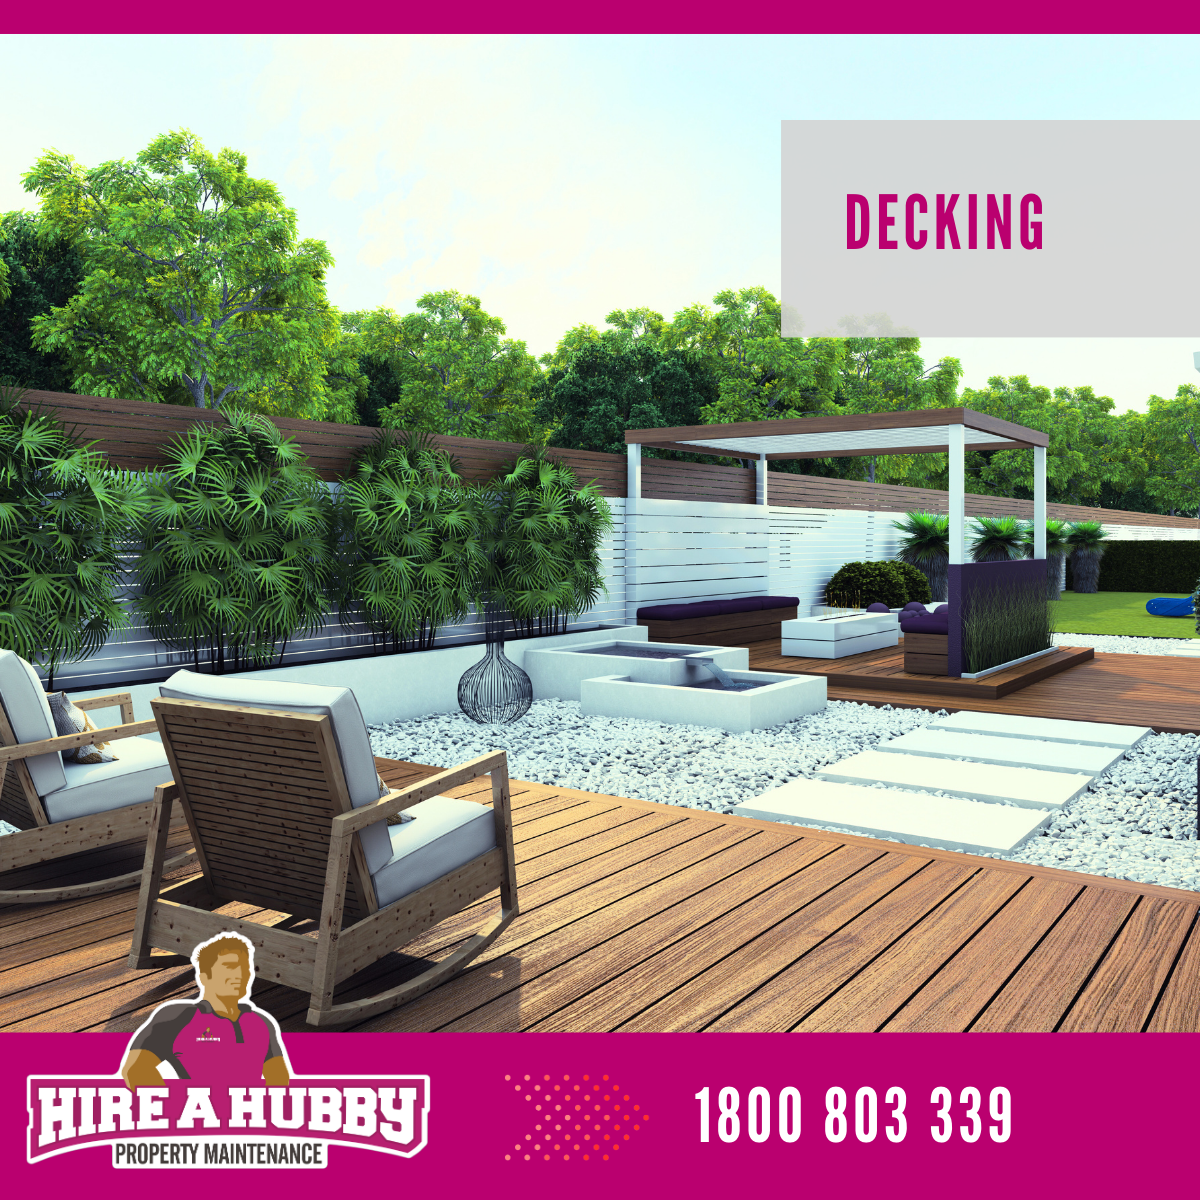 Decking Hire A Hubby Castle Hill Rouse Hill 1800 803 339